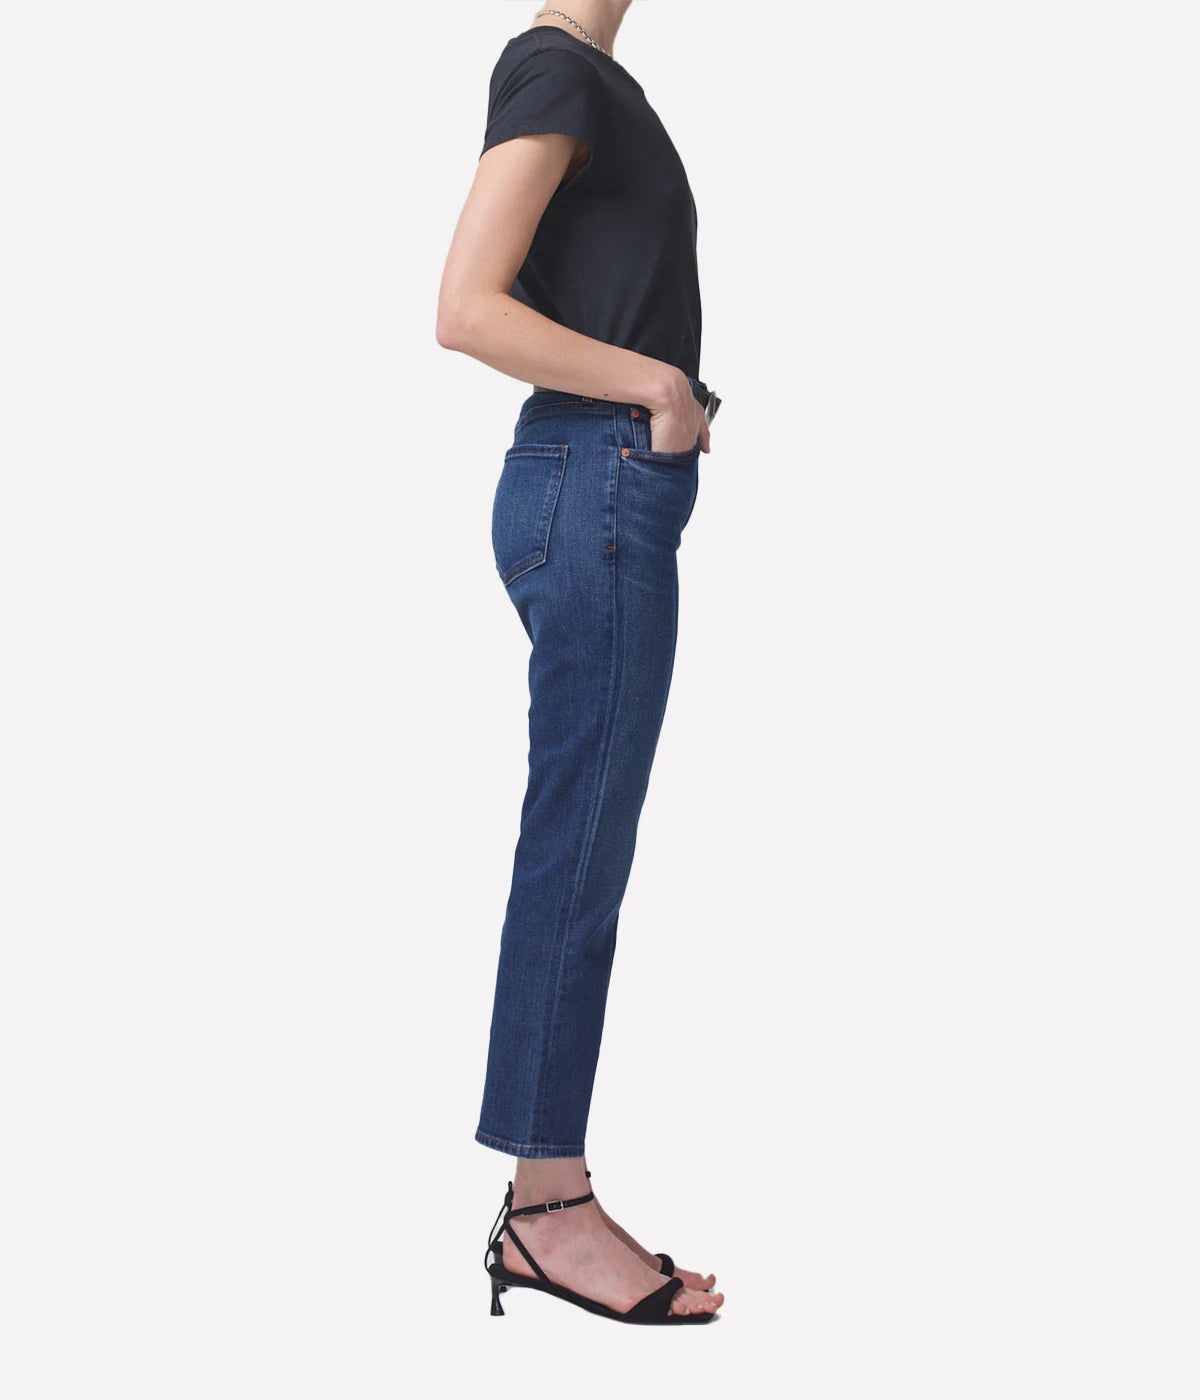 Isla Cropped Boot Jean in Provance